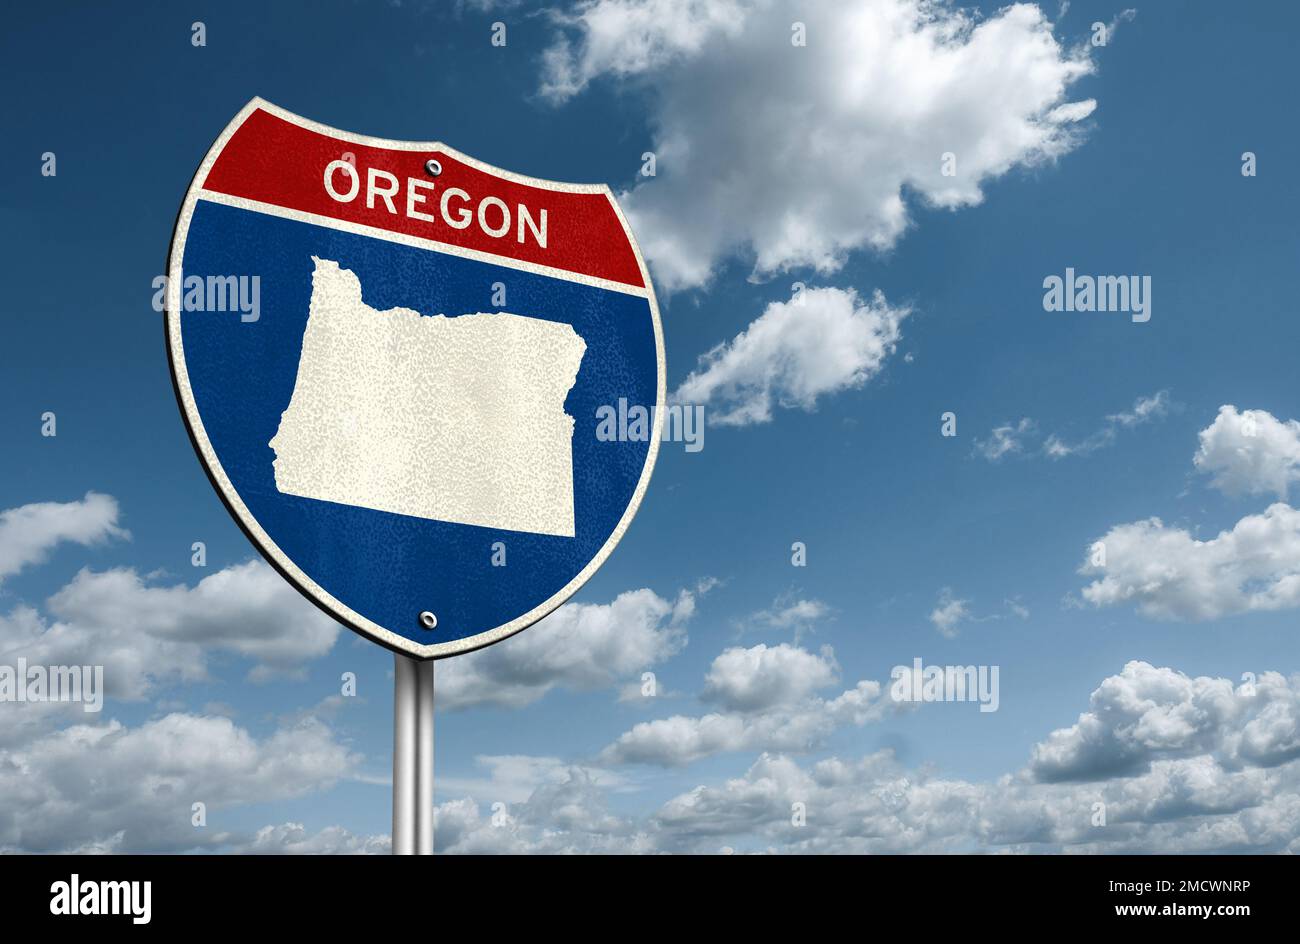 Oregon map - Interstate road sign Stock Photo